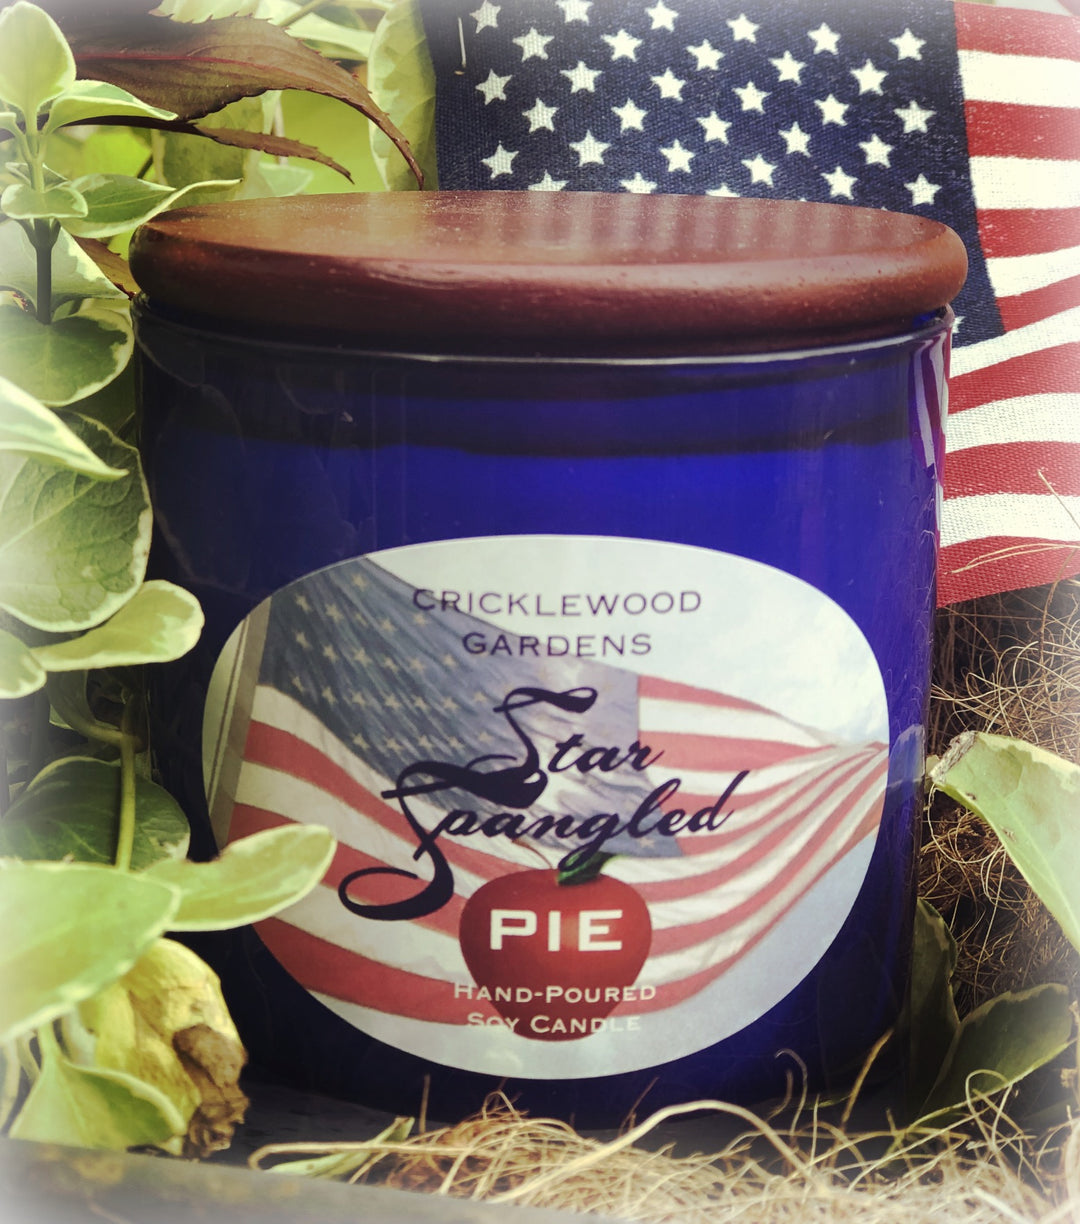 Star Spangled Pie Natural Soy Candles, 11oz